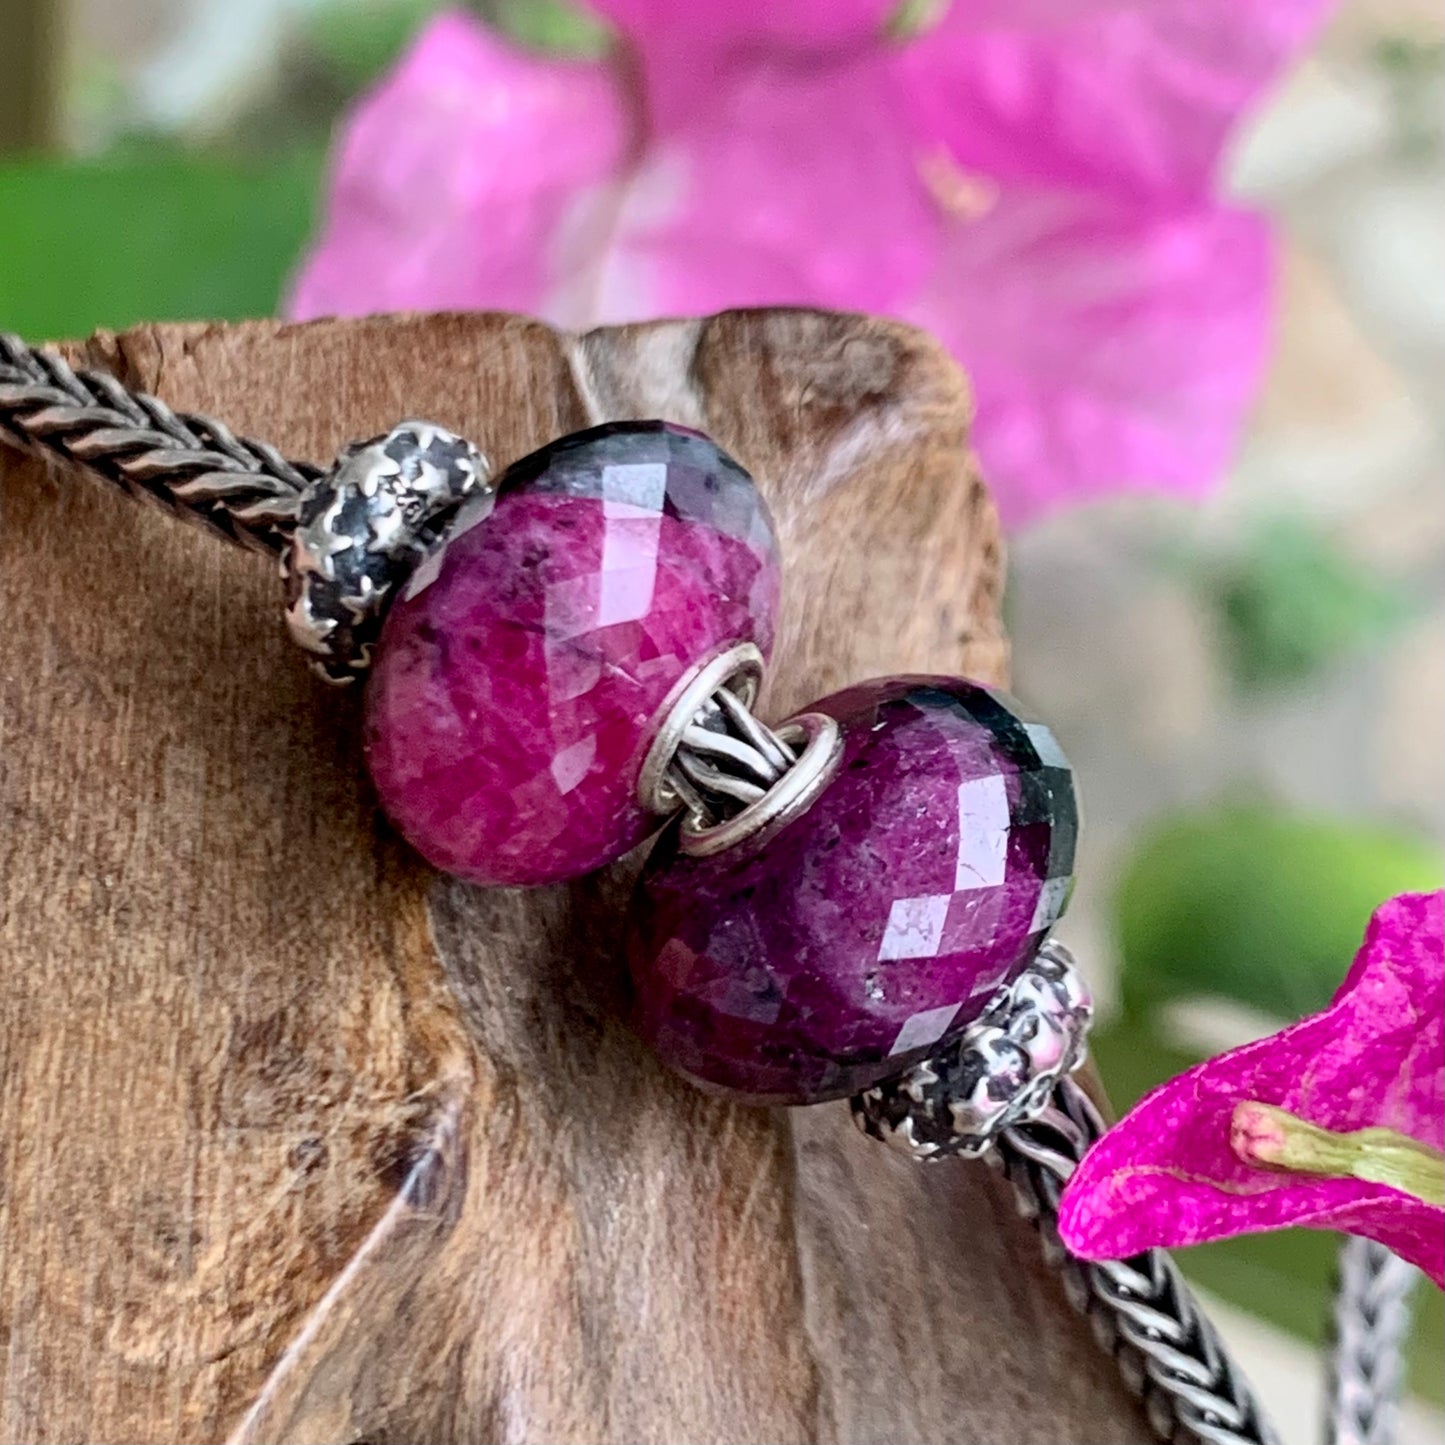 Faceted Ruby and Black Tourmaline Beads Fit European Trollbeads Bracelets and Some of the Pandora Bangles